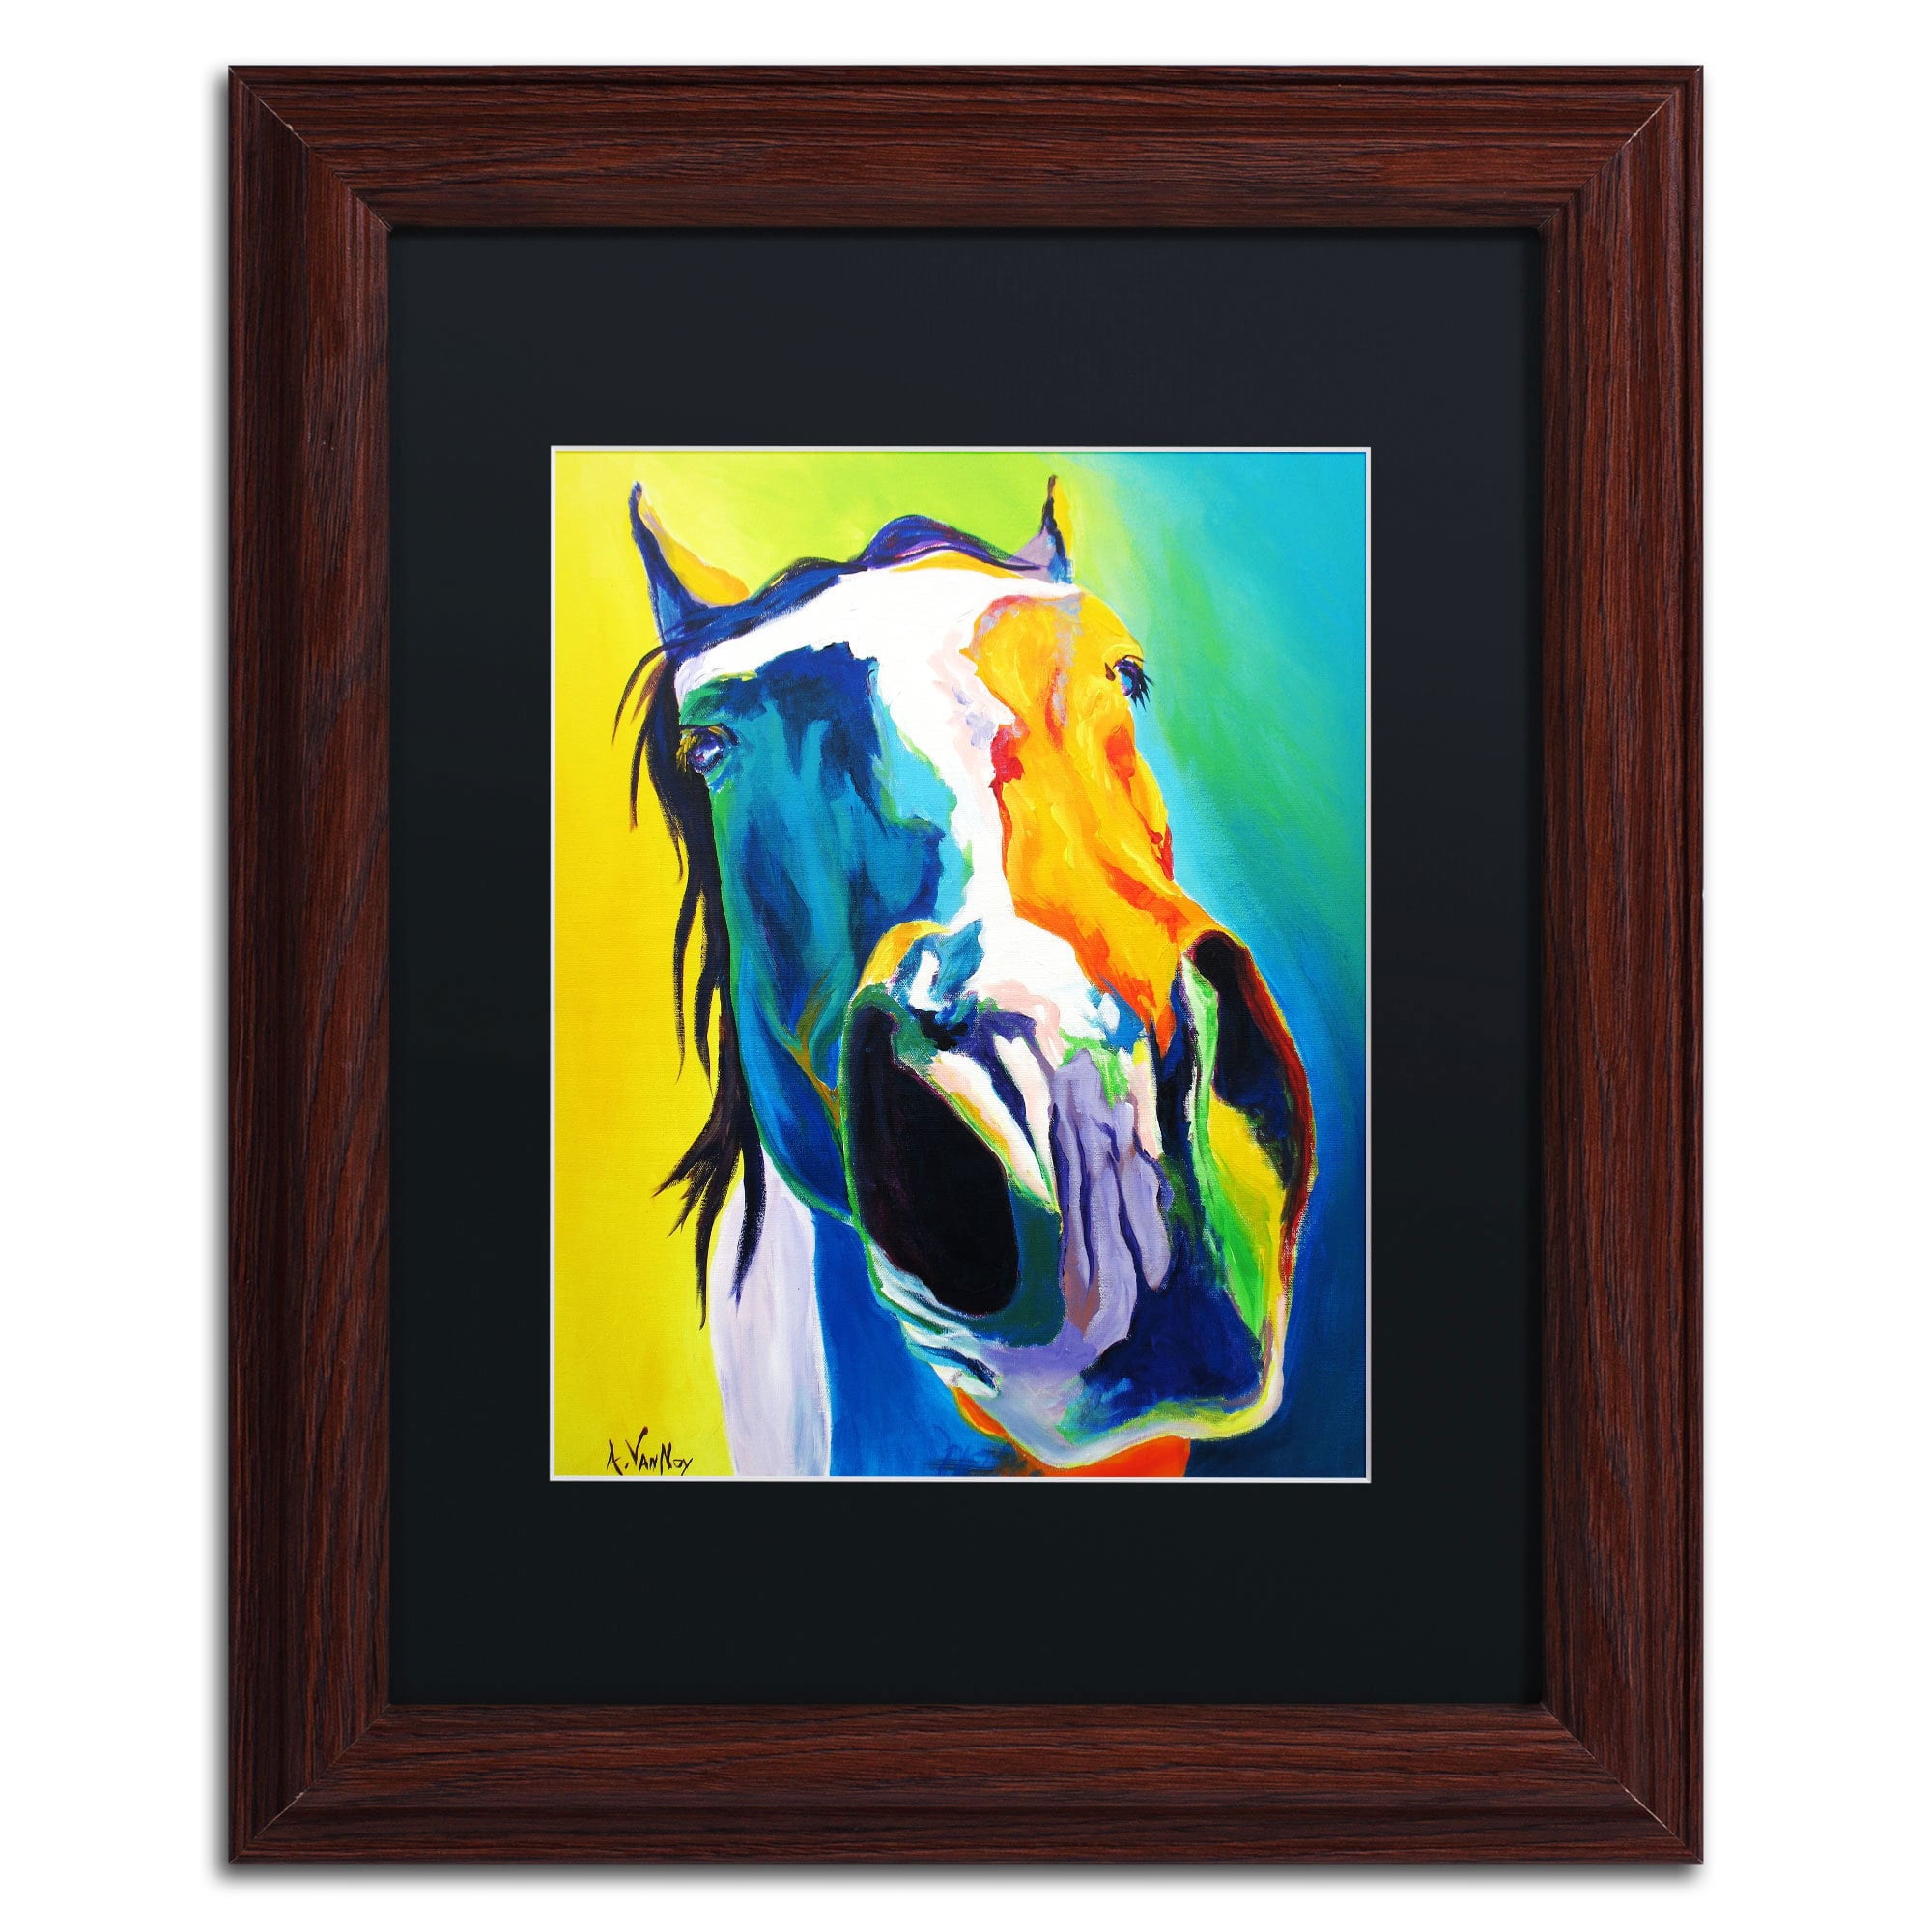 Up Close and Personal Artwork DawgArt in White Matte and Black Frame 11 by 14-Inch